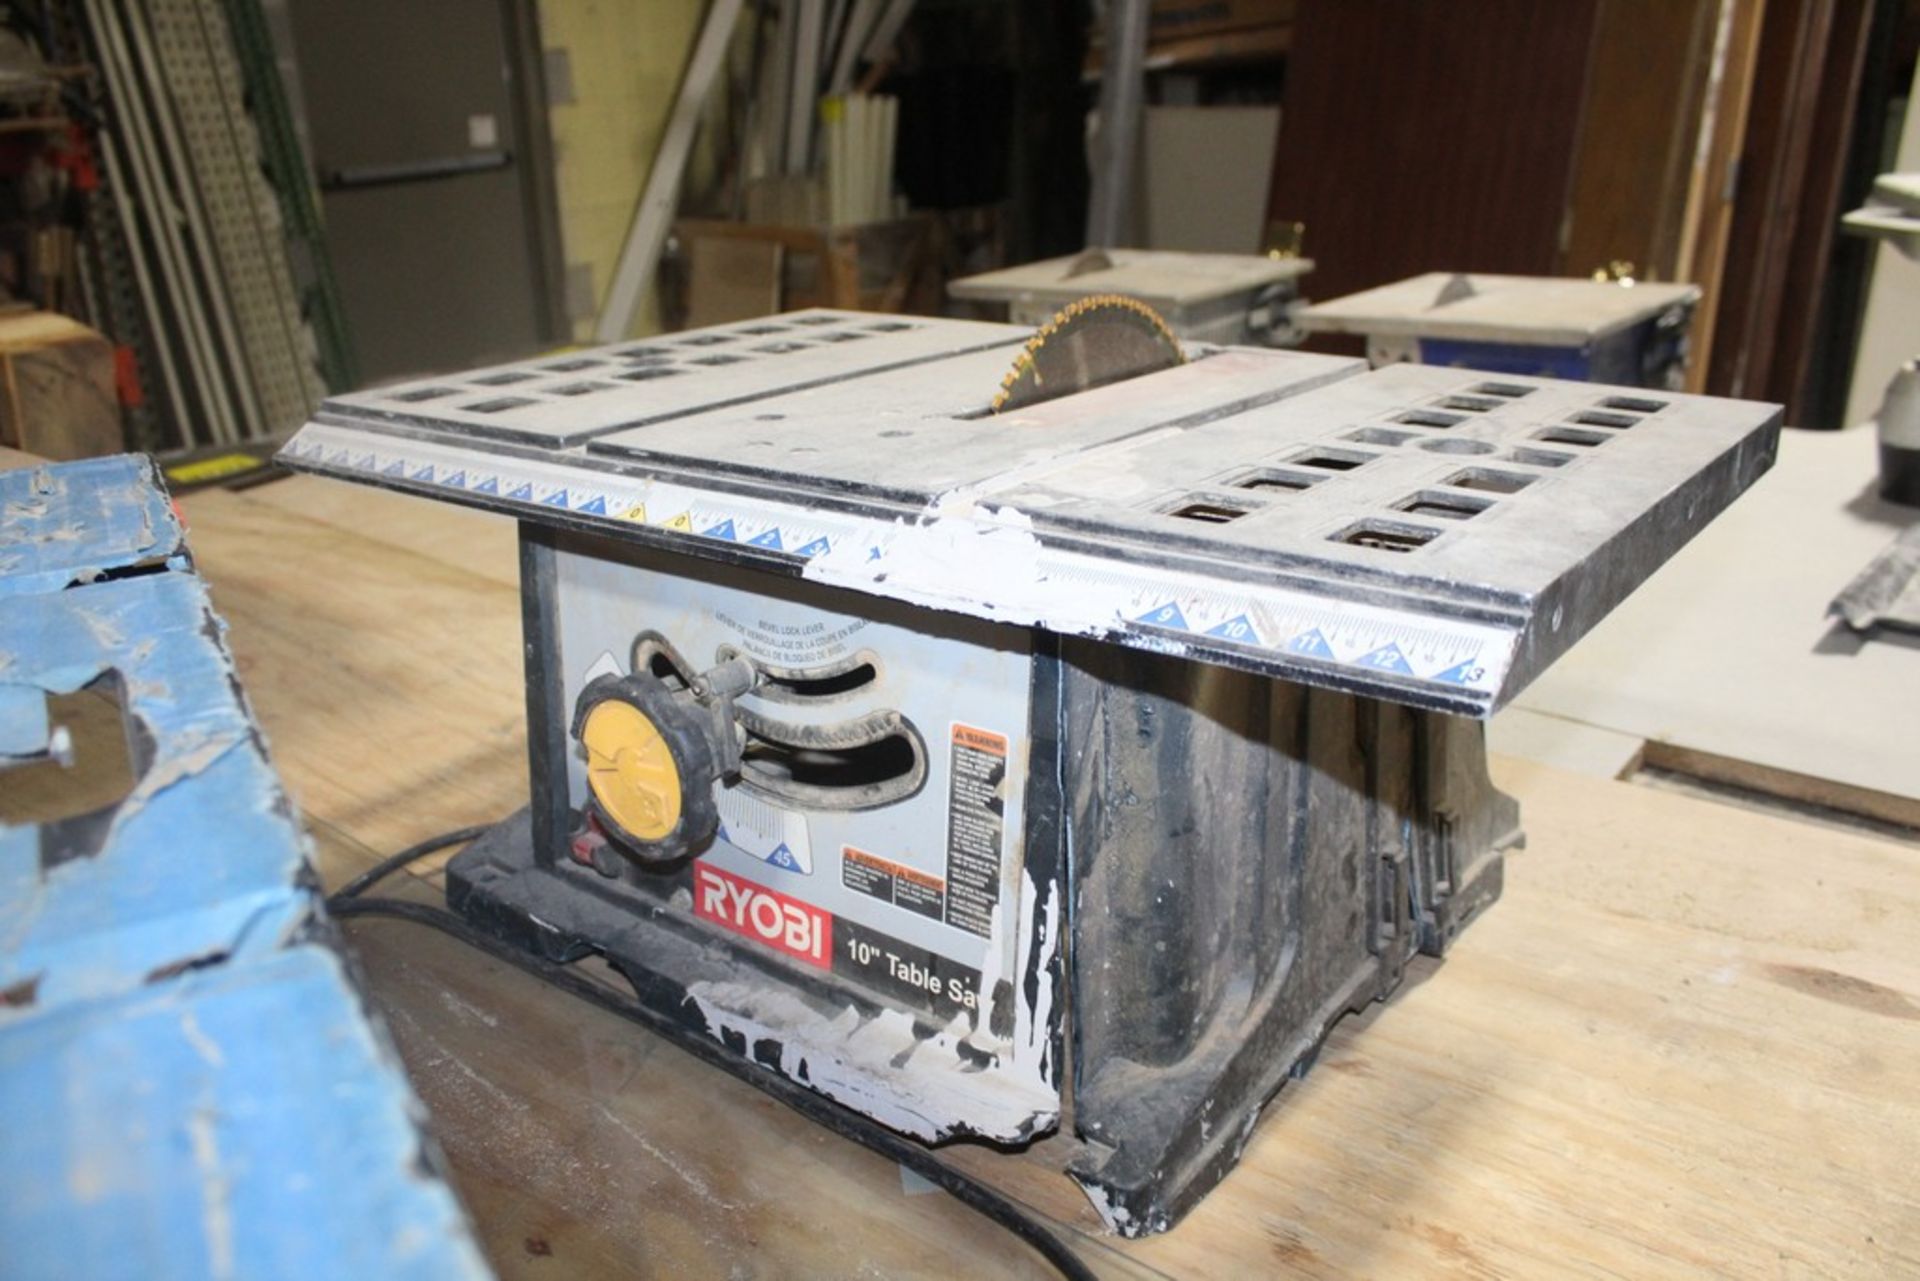 SKILSAW 10" BENCHTOP TABLE SAW WITH RYOBY BENCTOP SAW FOR PARTS - Image 4 of 4